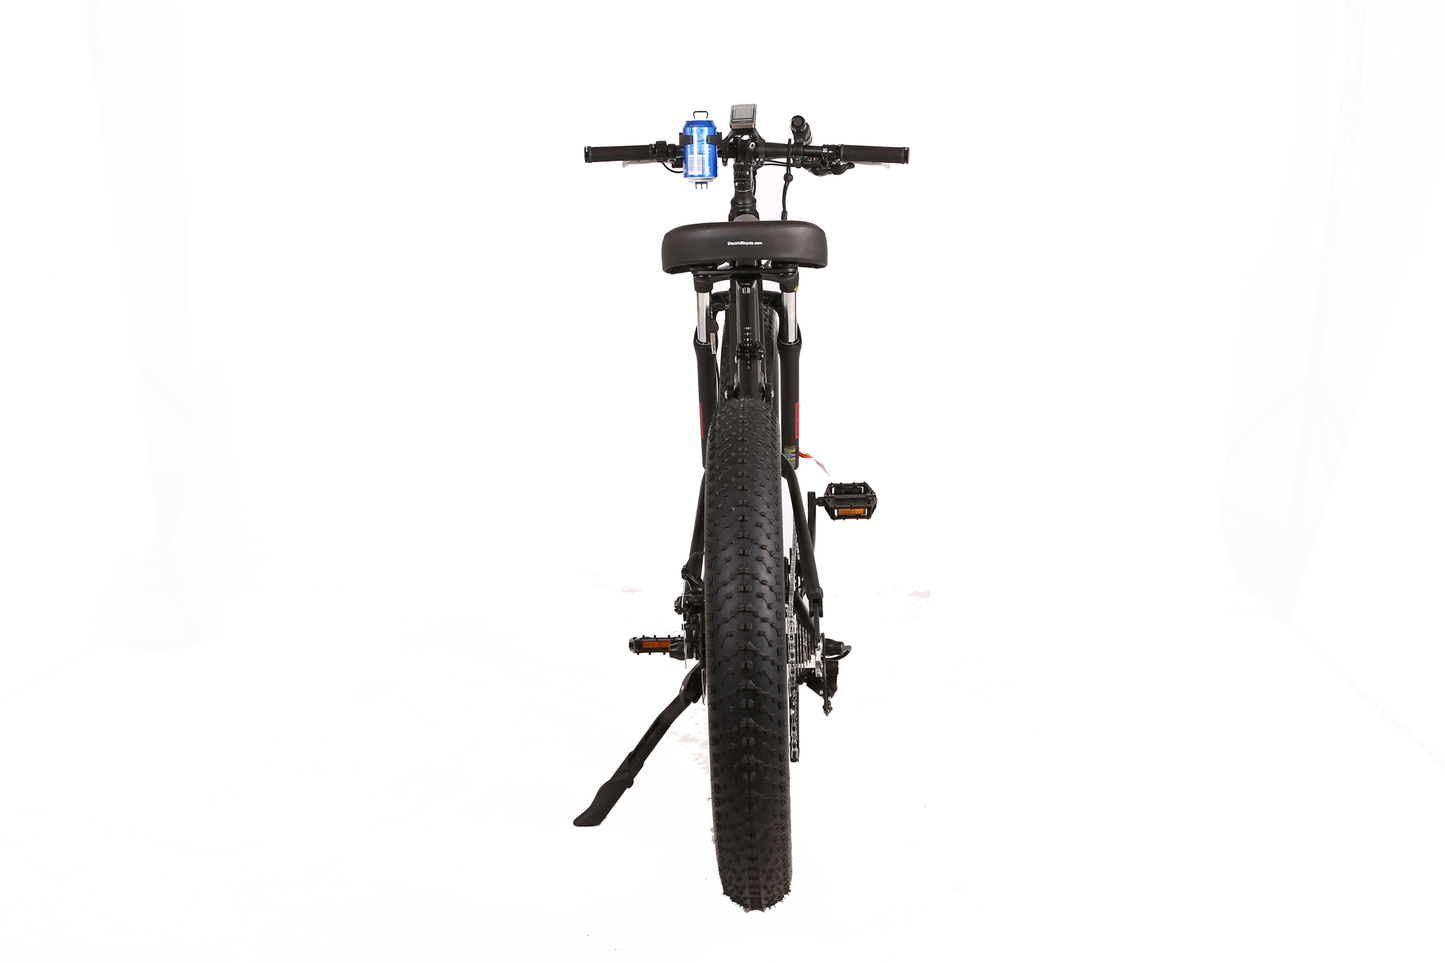 X-Treme Rocky Road 48 Volt 17 Amp Fat Tire Electric Mountain Bicycle-Black